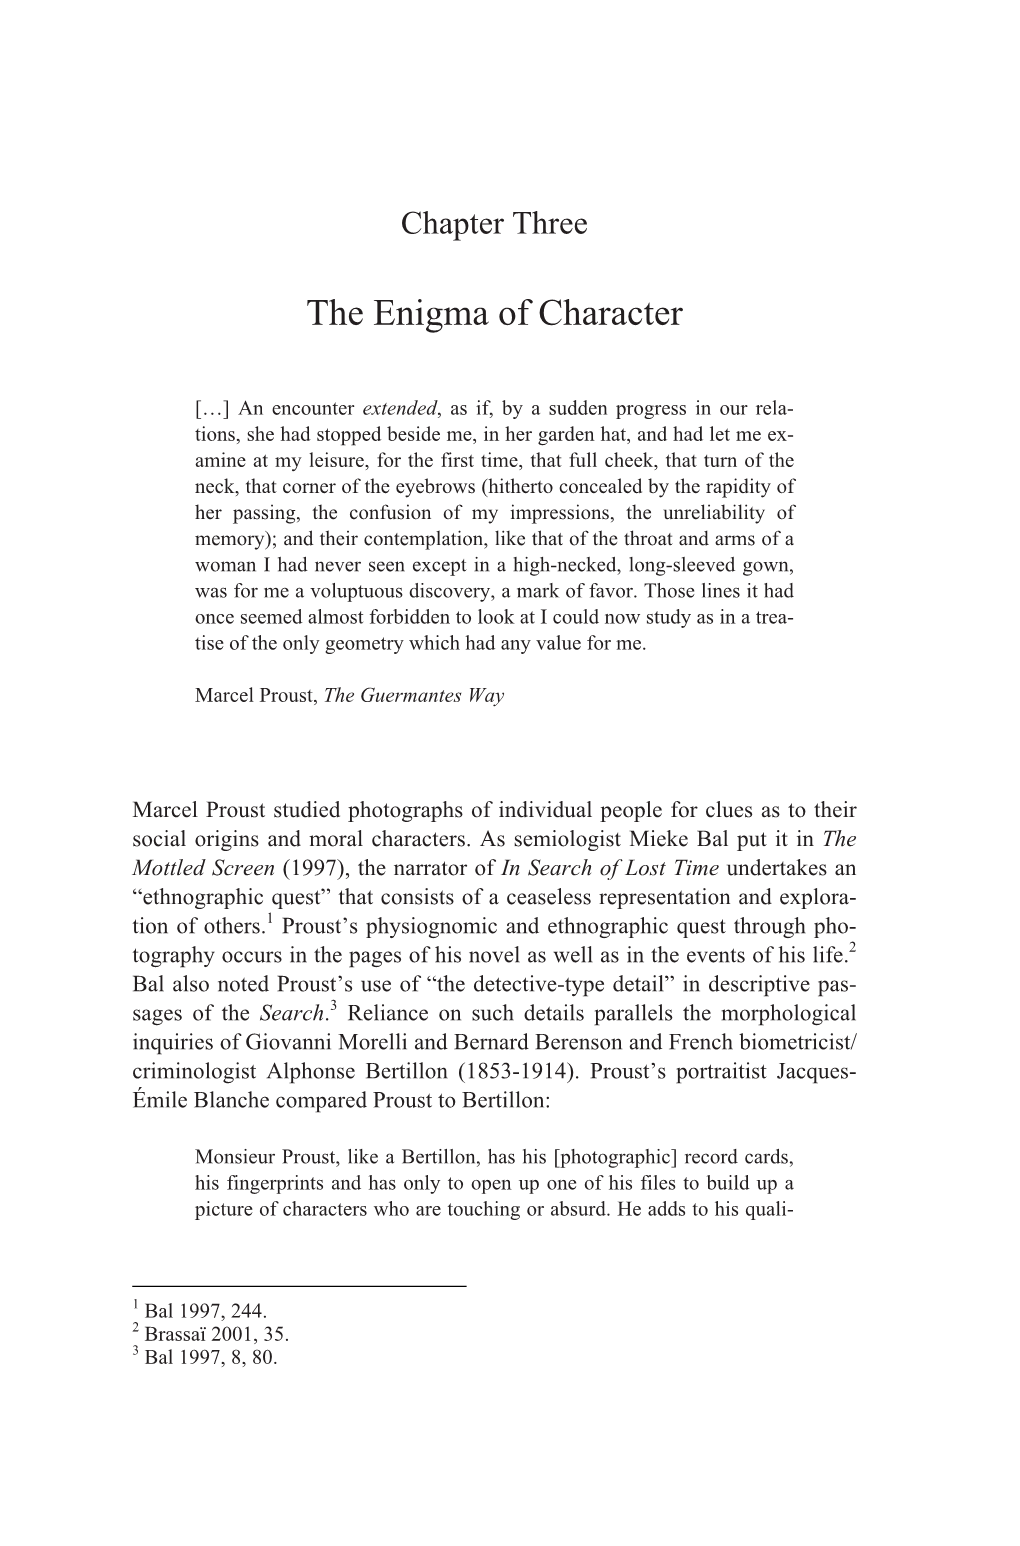 The Enigma of Character